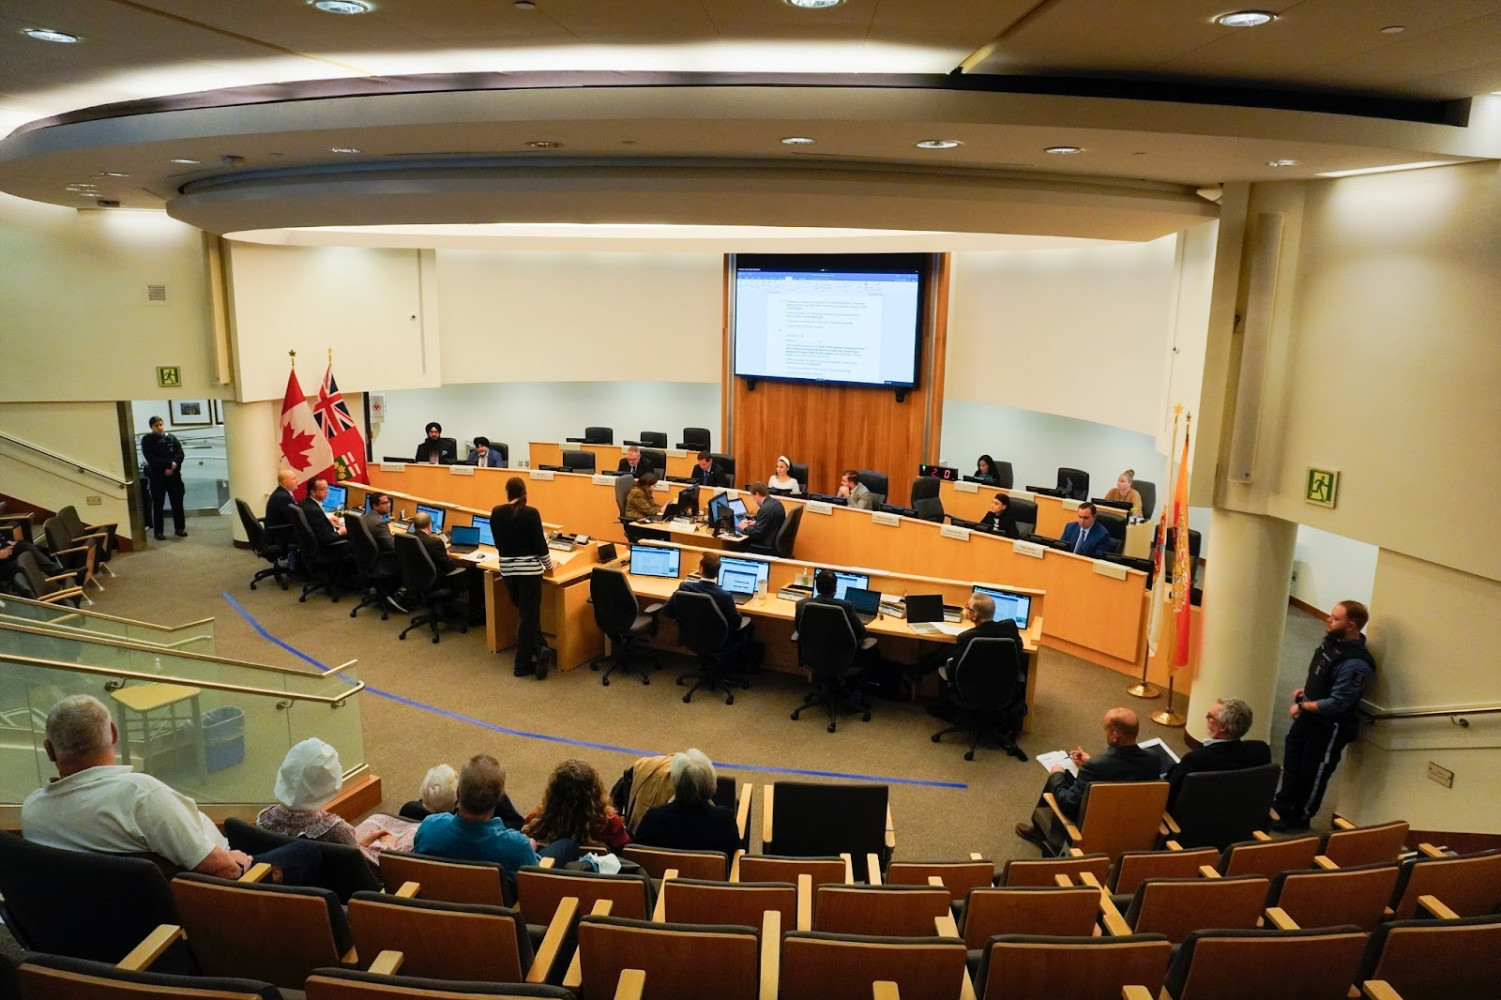 Critical projects for Brampton’s future lead agenda as busy fall session gets underway